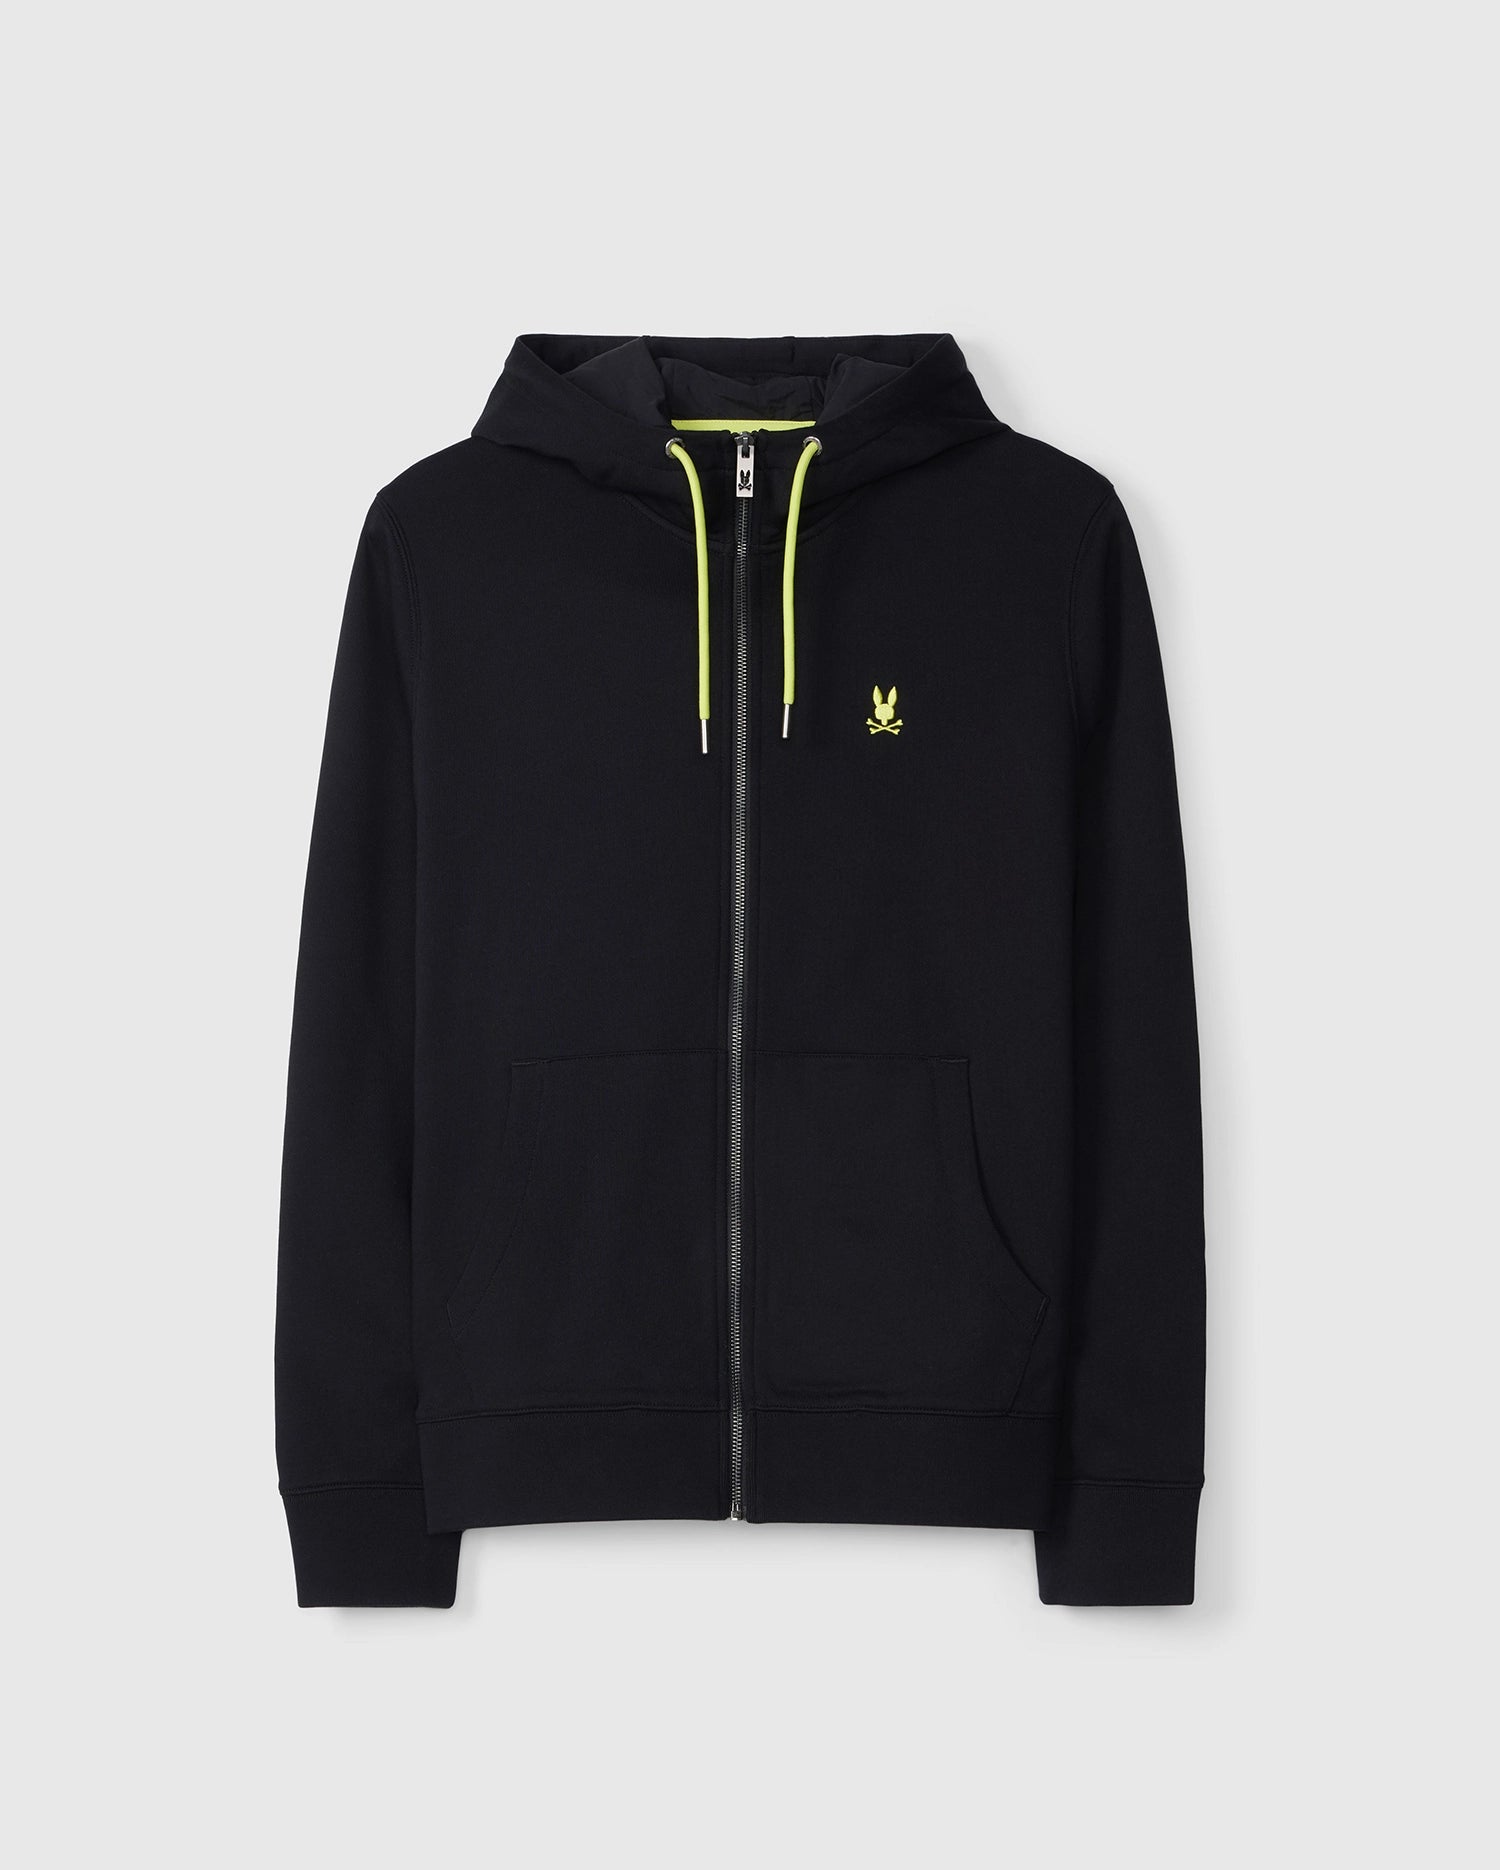 A black zip-up Psycho Bunny MENS BUFFALO FULL ZIP HOODIE - B6H175B200 with a yellow rabbit logo on the left chest and yellow drawstrings. The 100% cotton hoodie features ribbed cuffs, a zip closure, and two front pockets. The design is simple and casual, set against a plain white background.